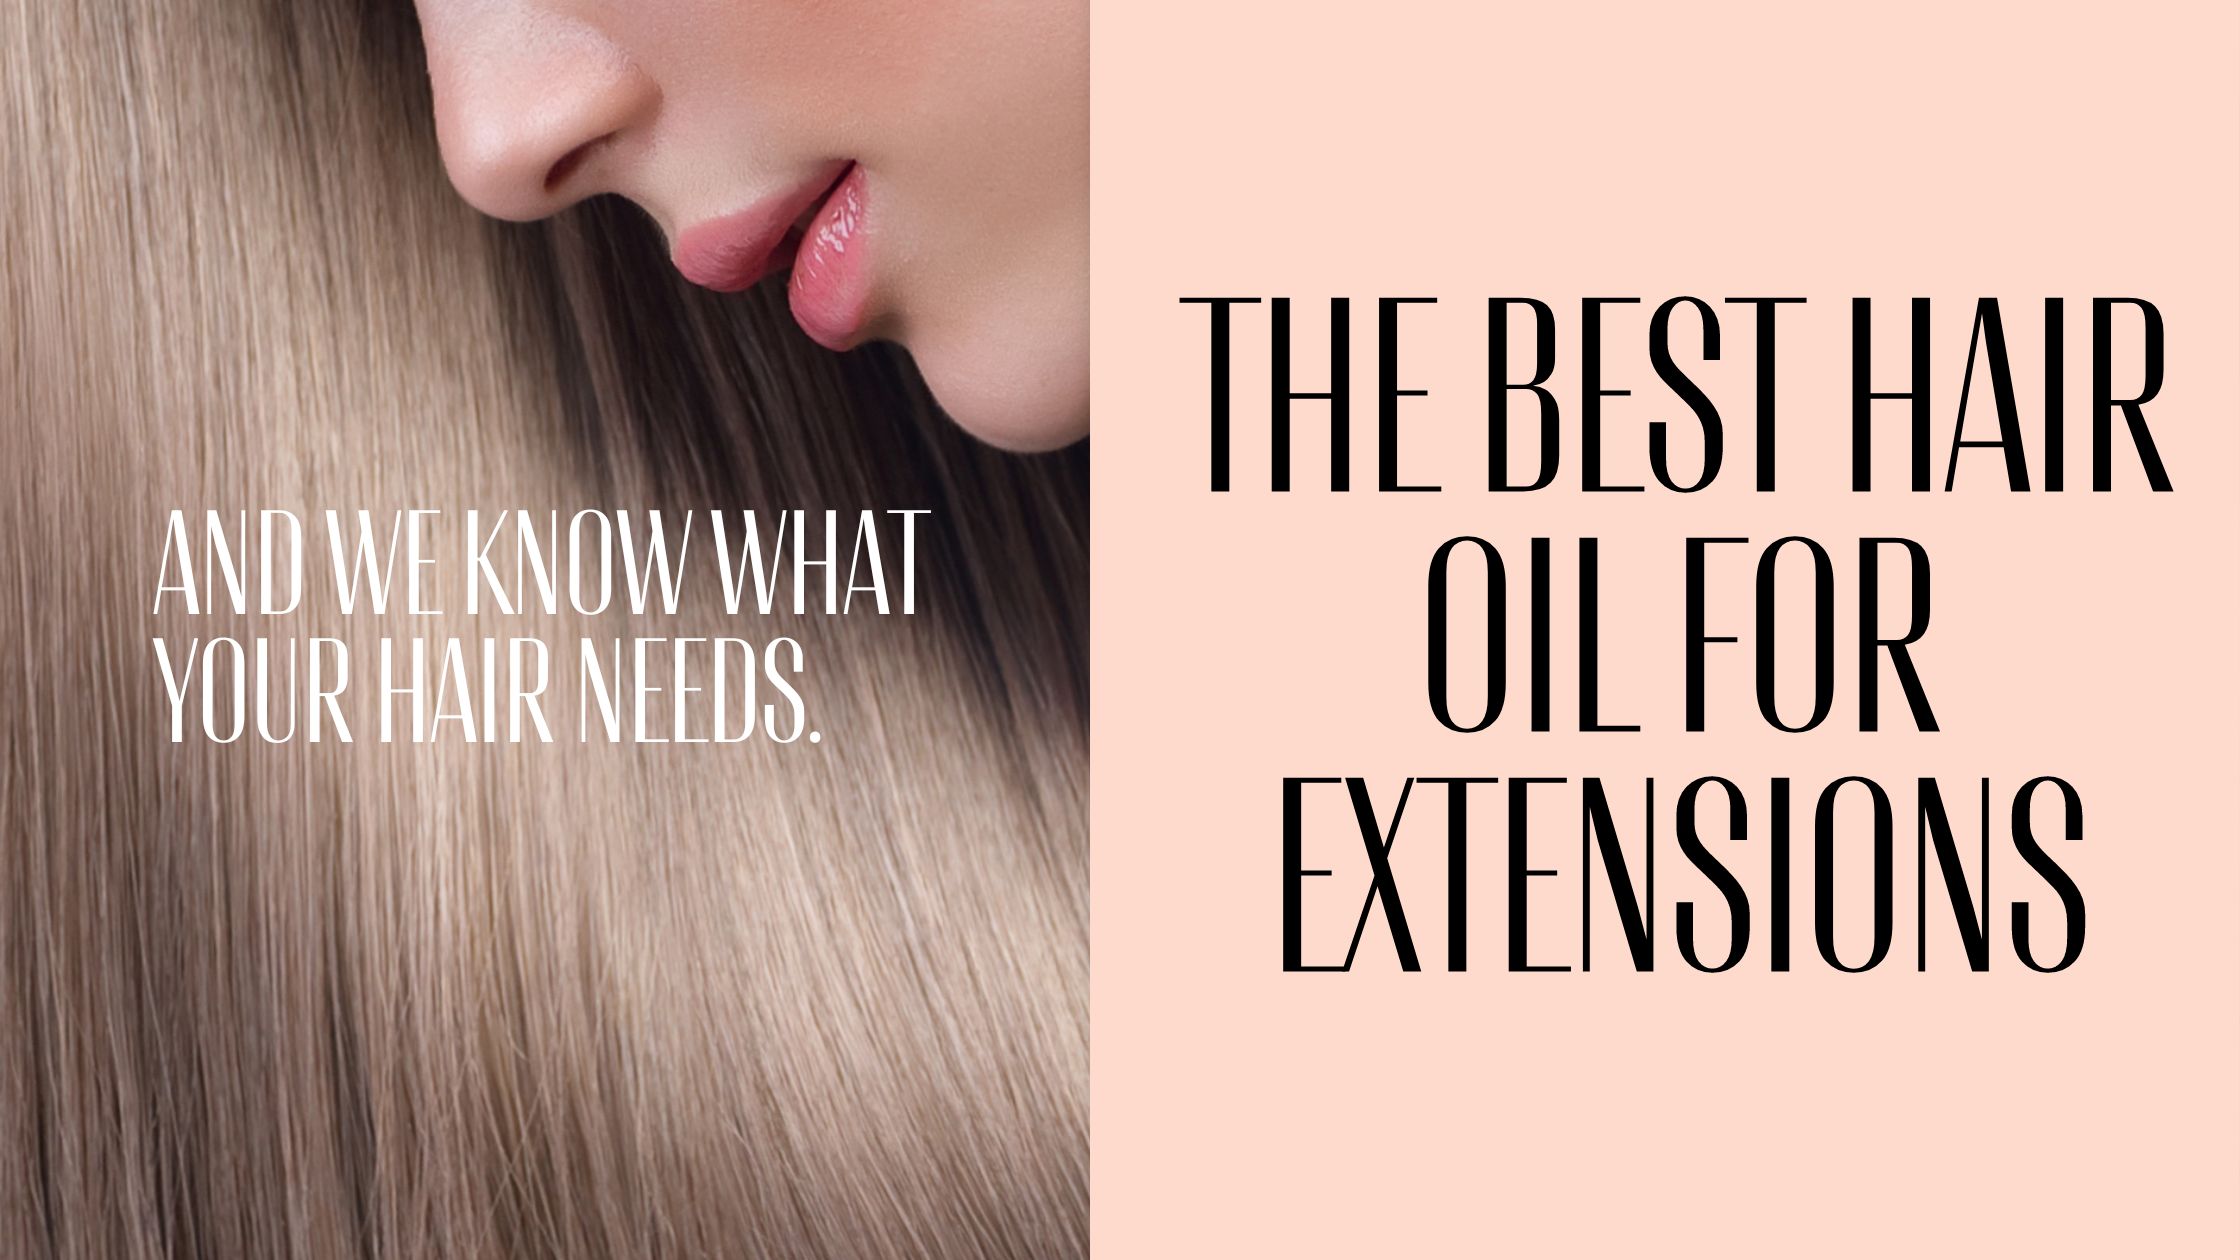 The best hair oil for extensions